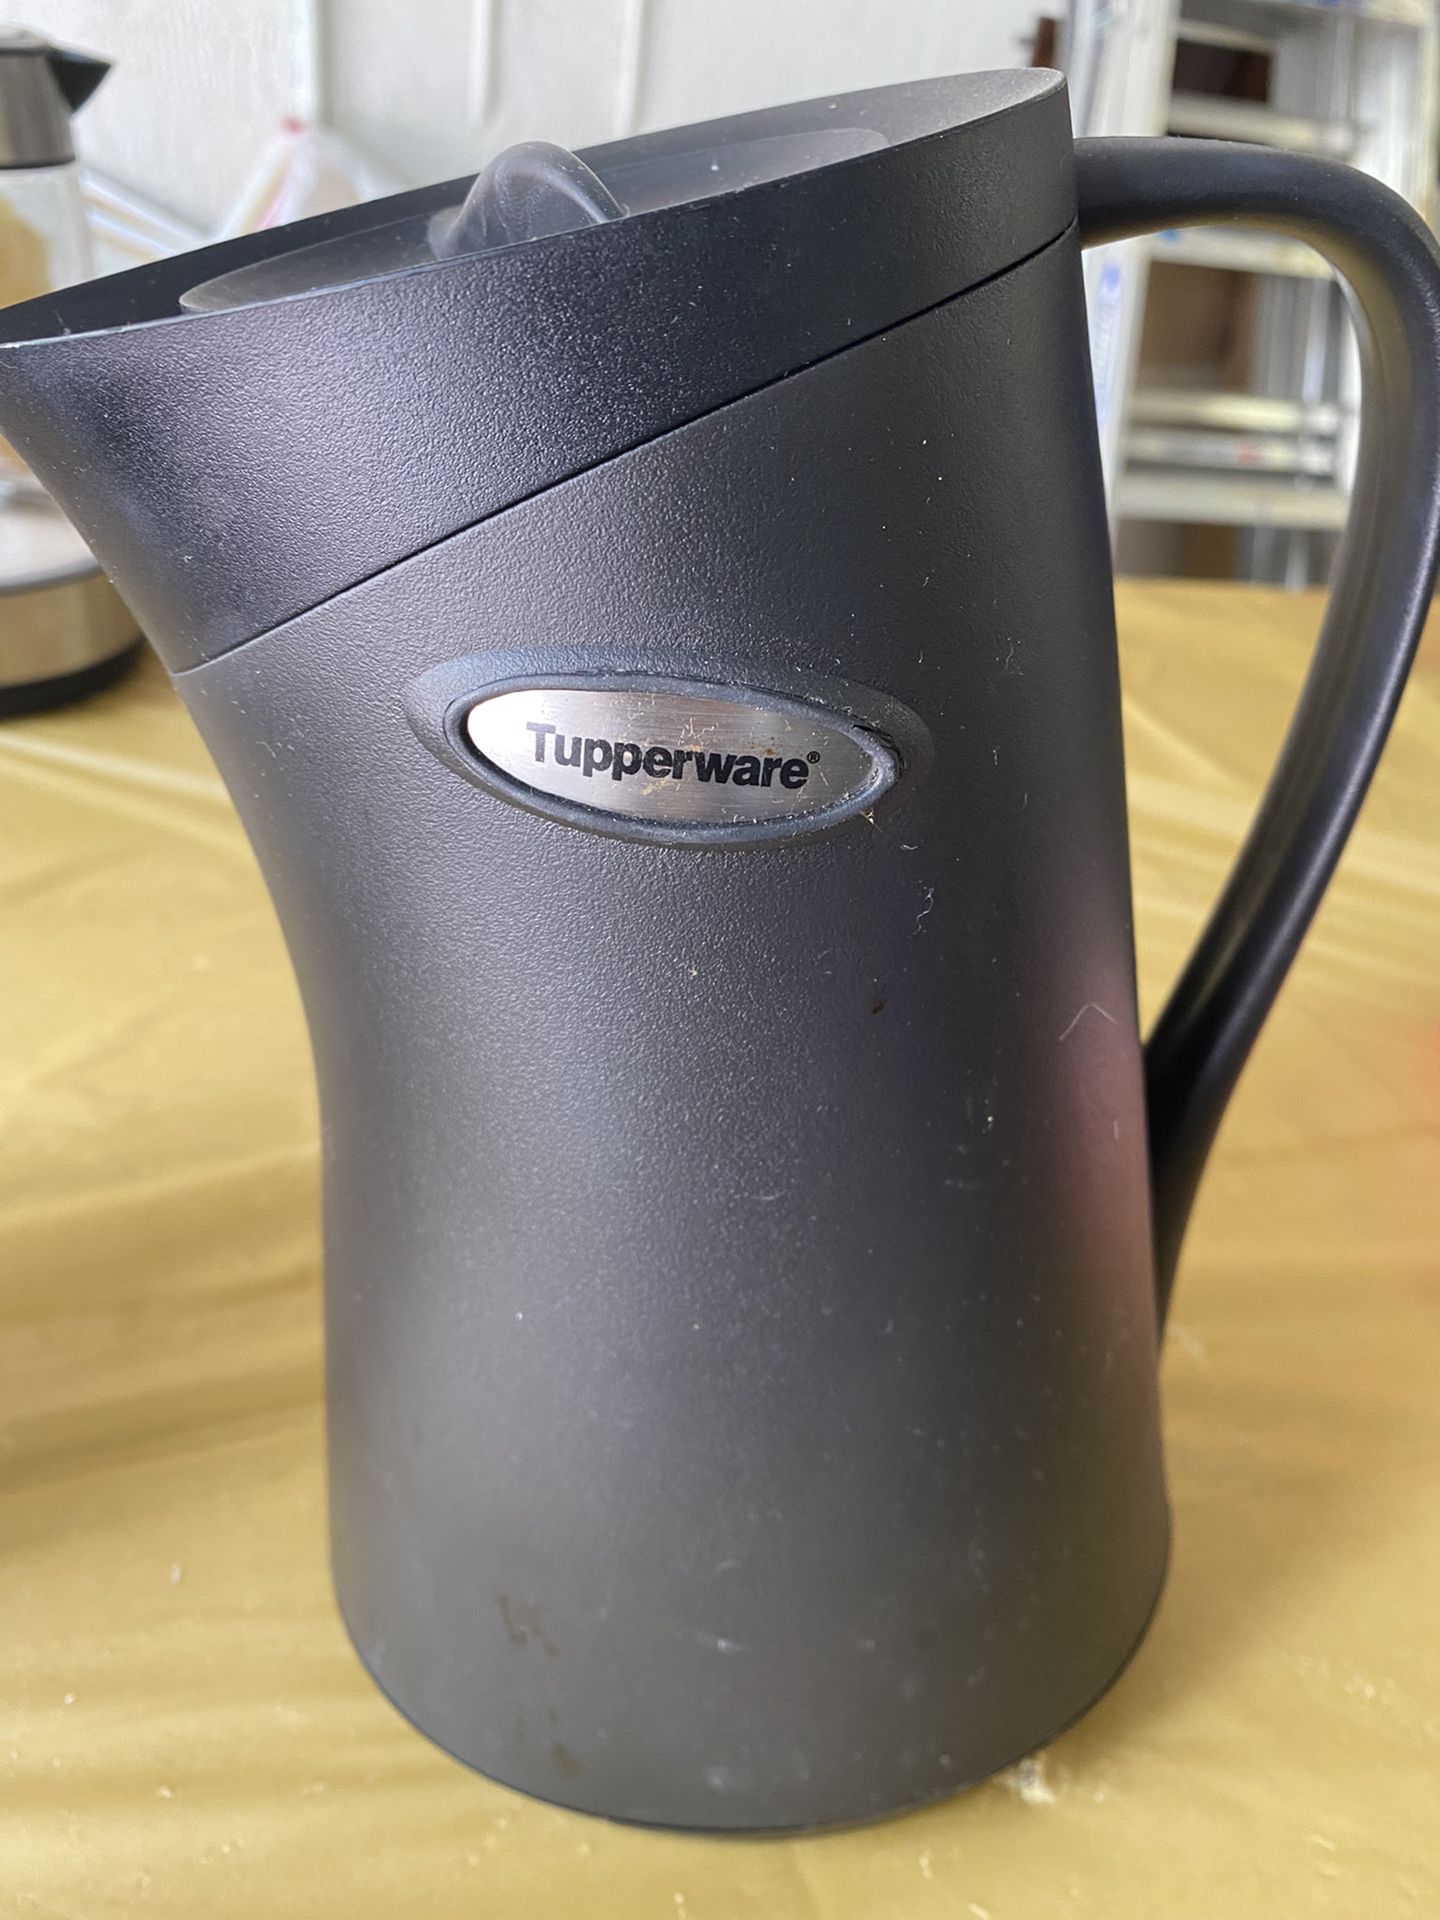 Tupperware Insulated Thermal Carafe Black 32 oz Pitcher